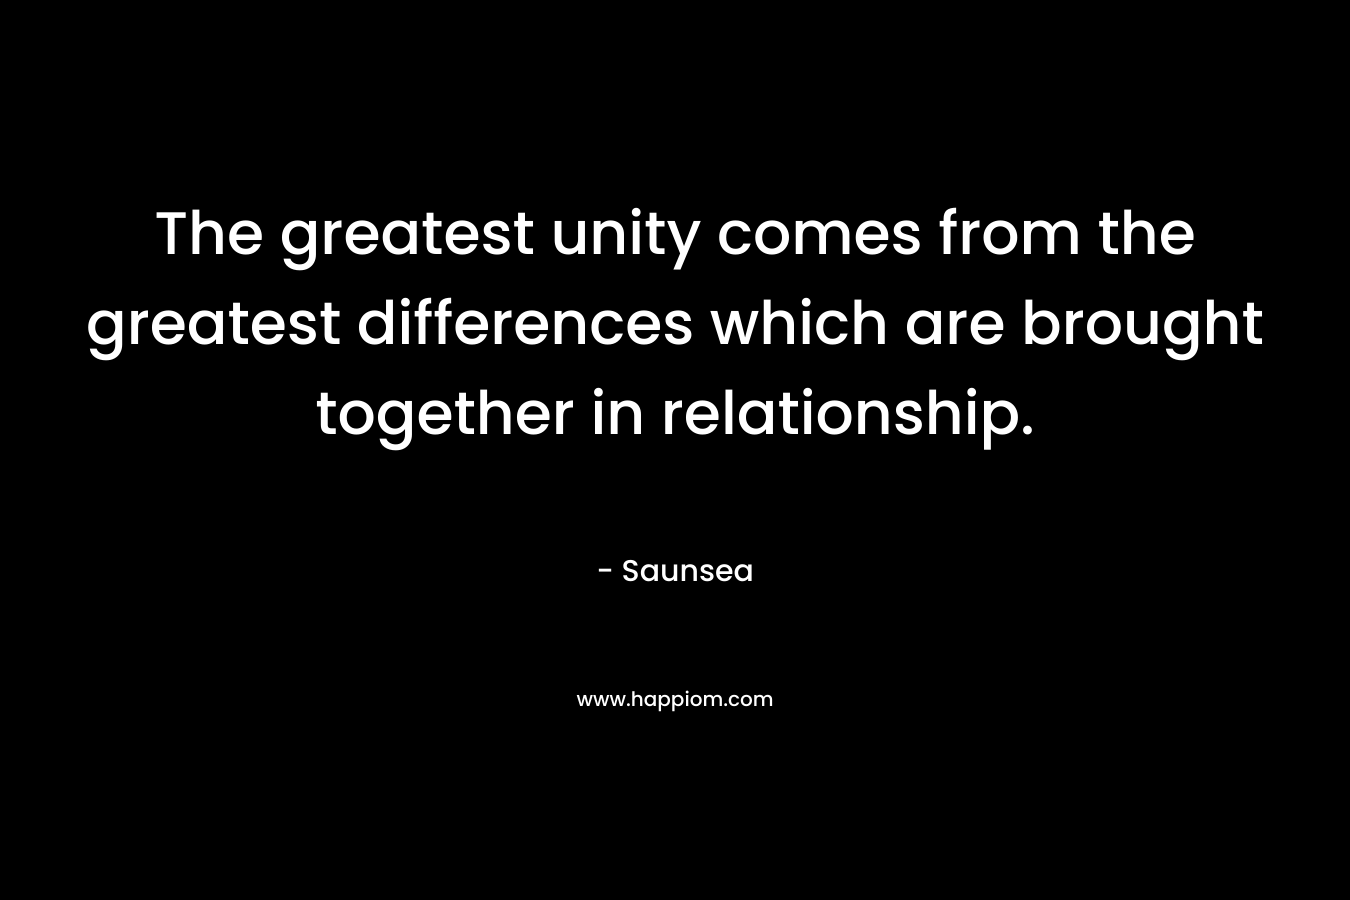 The greatest unity comes from the greatest differences which are brought together in relationship. – Saunsea